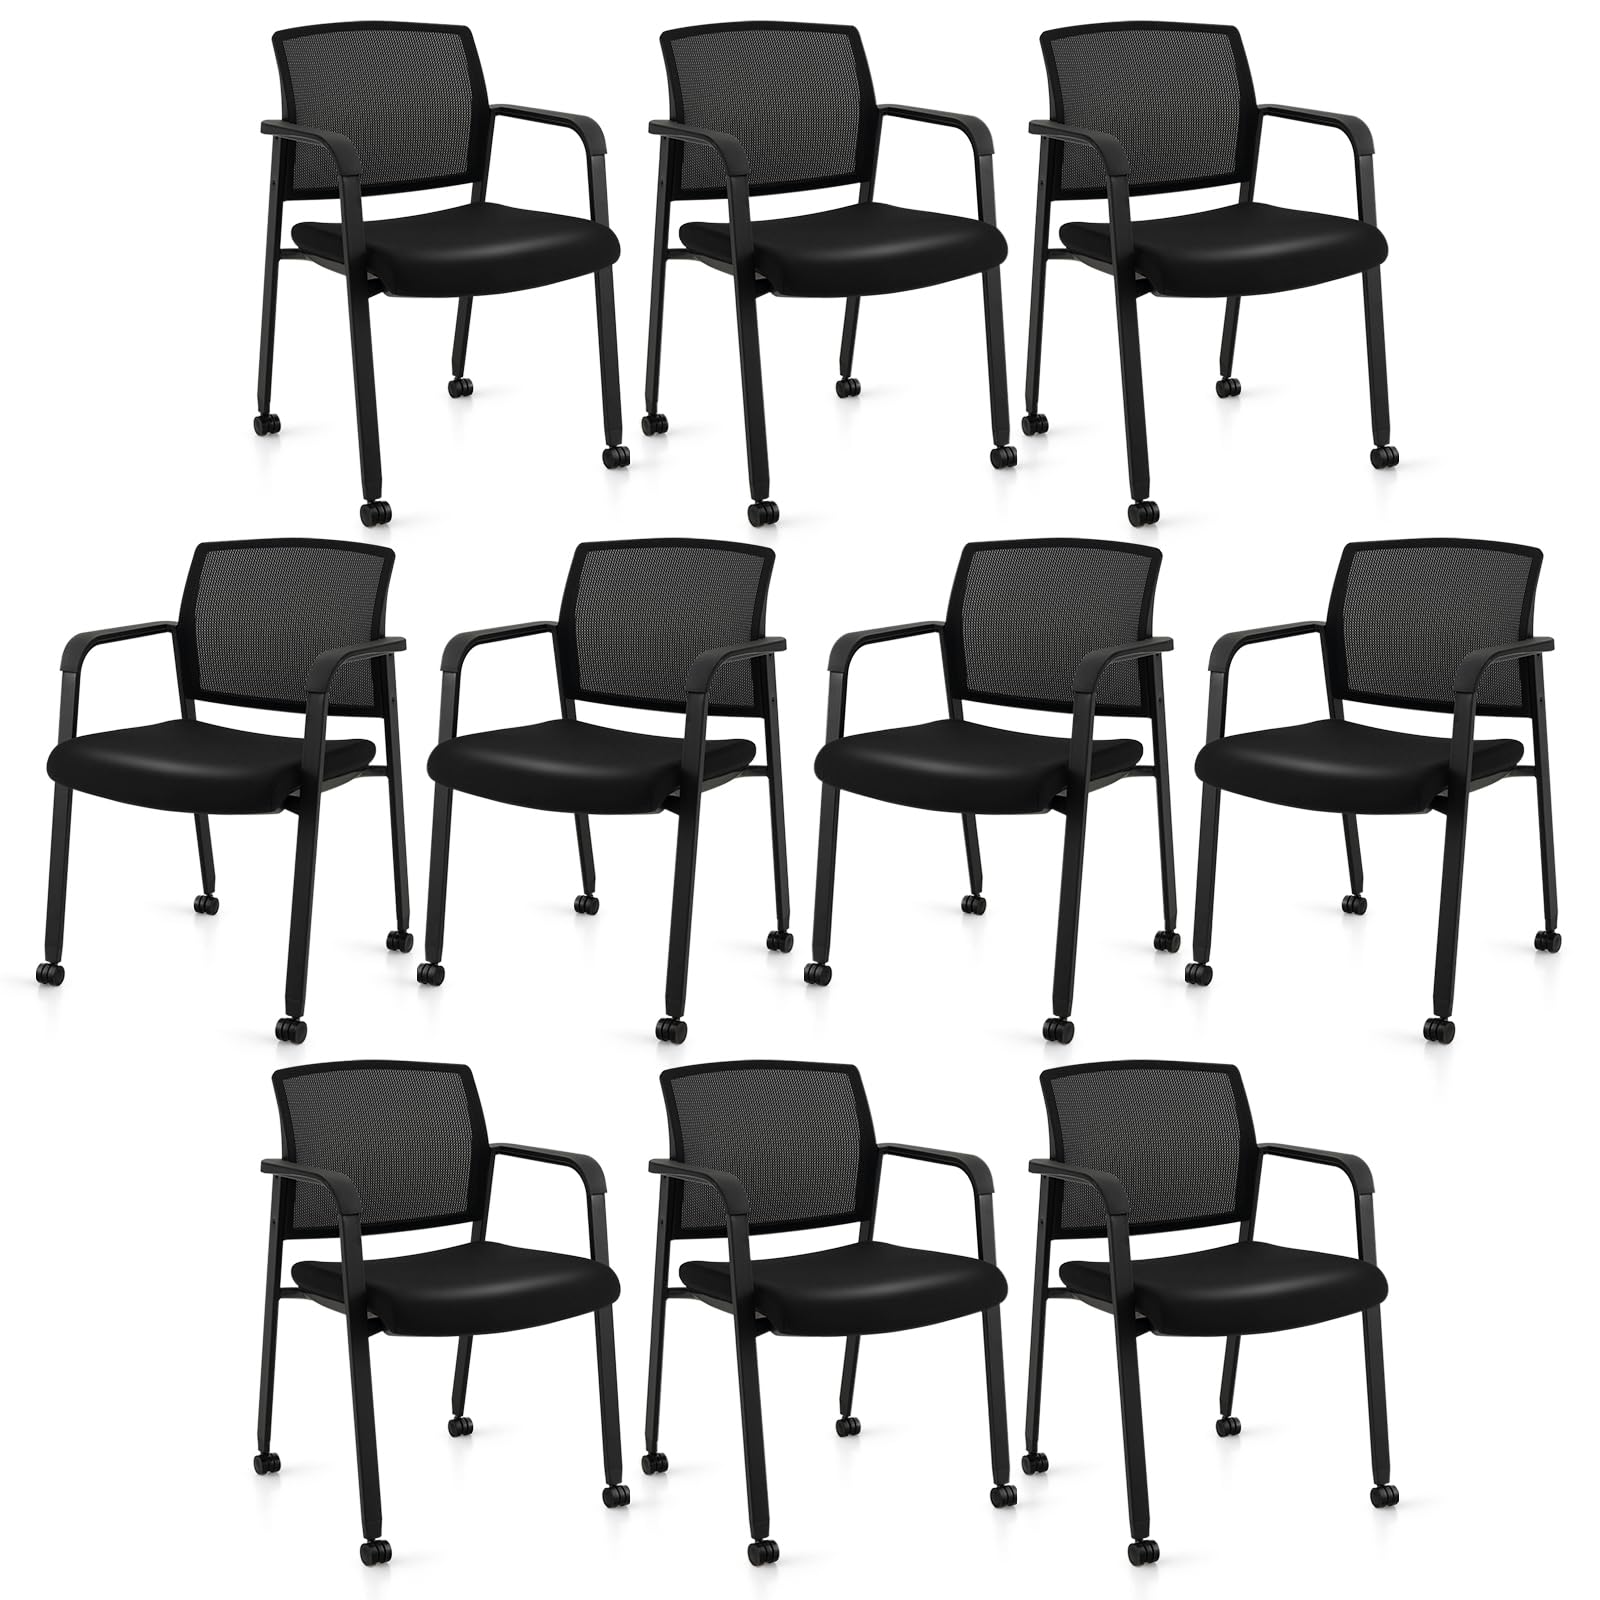 Rolling Conference Room Chairs - Tanglula